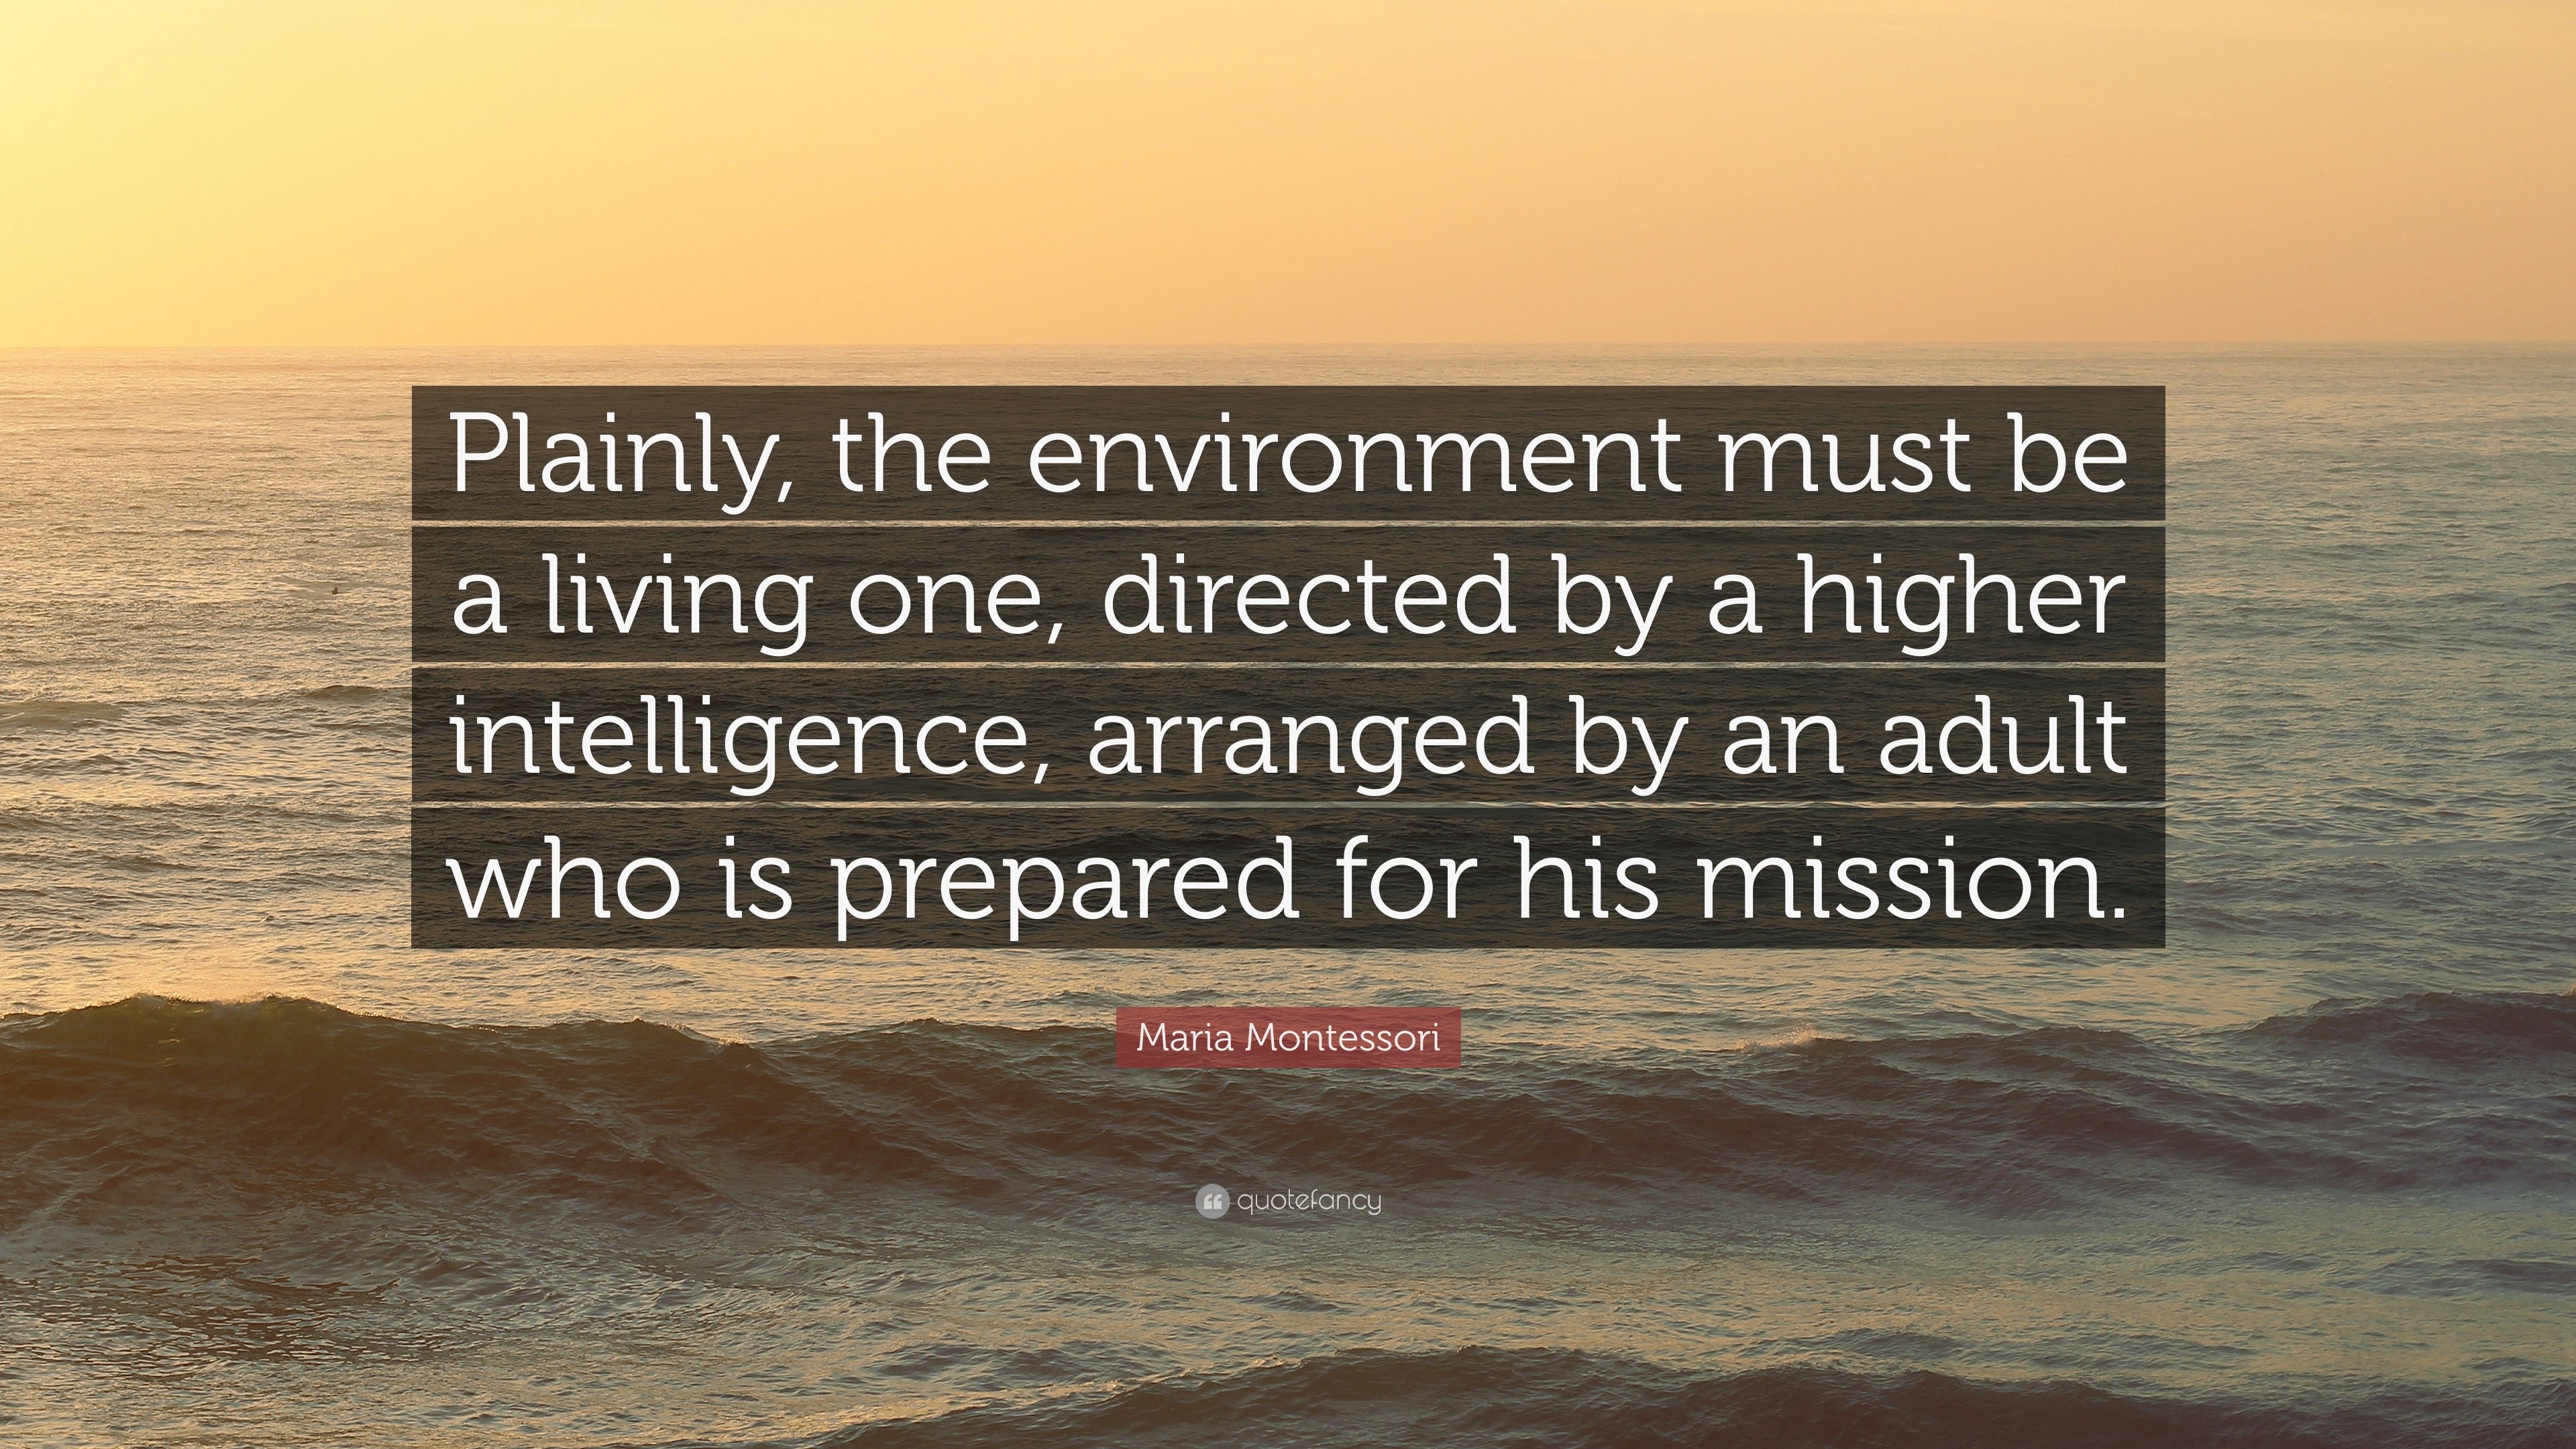 Maria Montessori Quote: “Plainly, the environment must be a living one